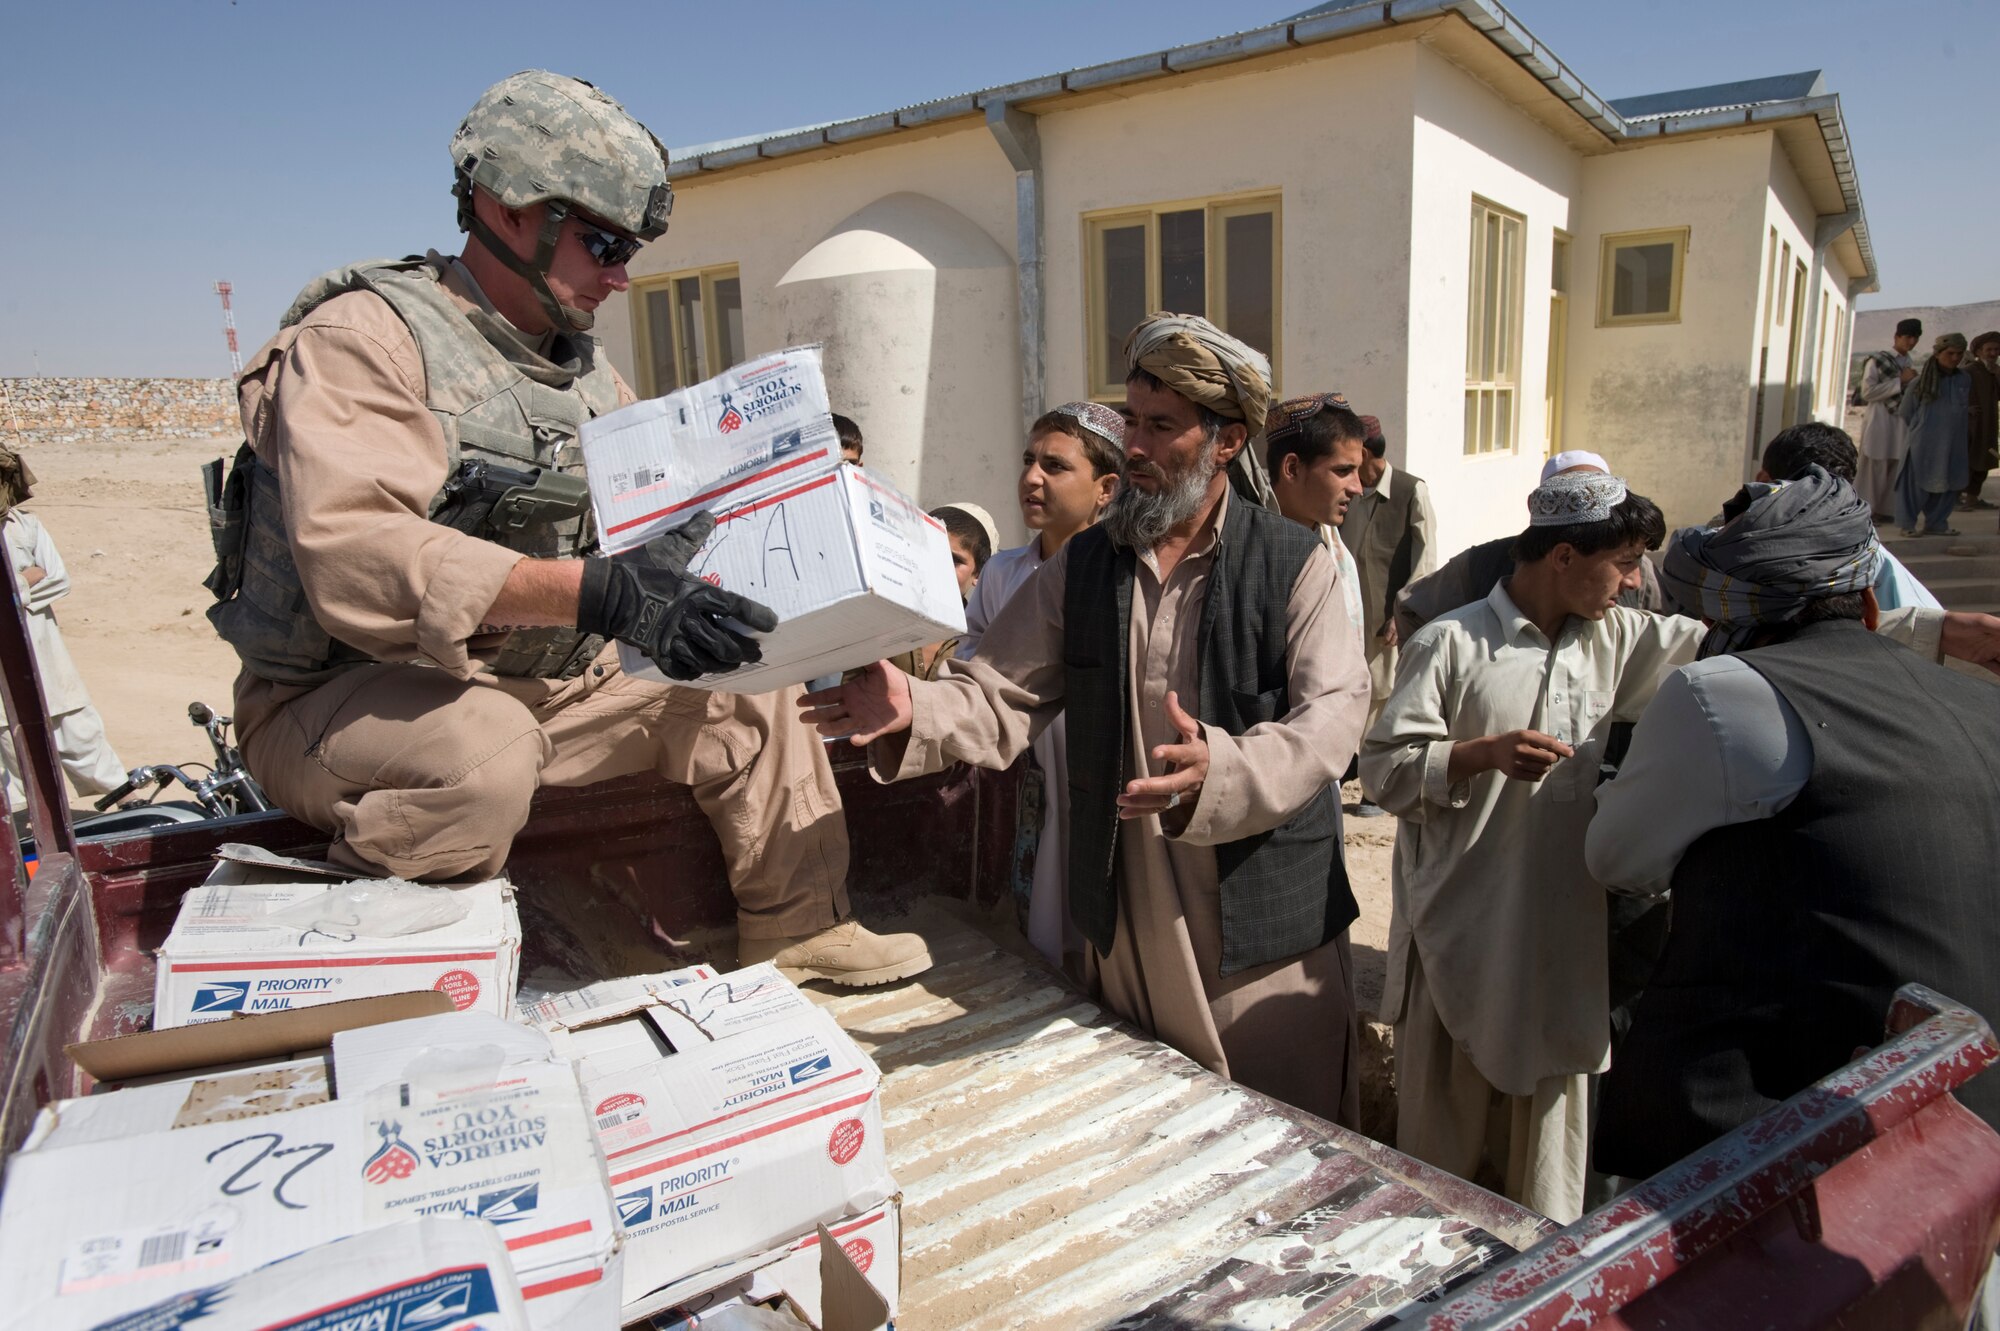 QALAT, Afghanistan – Army Sgt. Chris Stalder helps unload a donation of school supplies at an area school recently. The Zabul Provincial Reconstruction Team delivered the supplies on behalf of the Westfield Community School in Algonquin, Ill. Sergeant Stadler, a native of Willis, Texas, is deployed from the 451st Civil Affairs Battalion, Pasadena, Texas. (U.S. Air Force photo by Master Sgt. Keith Brown)